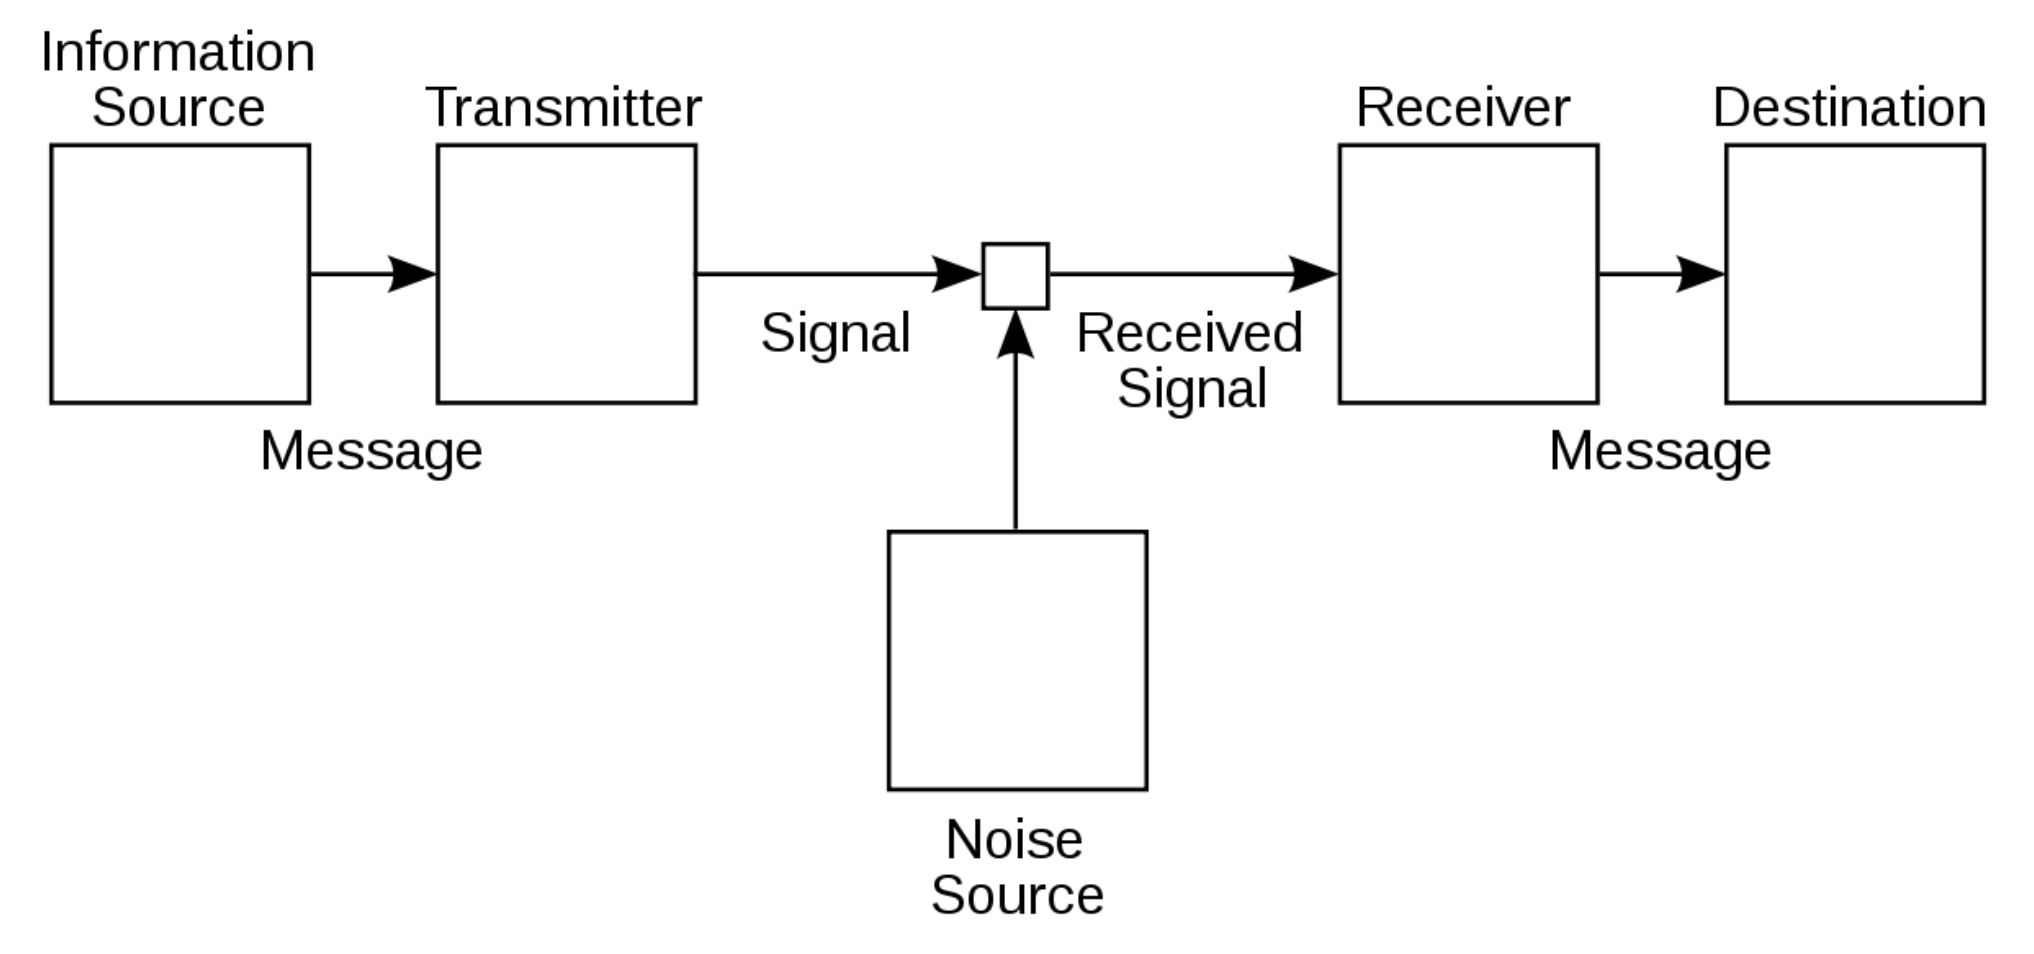 Claude Shannon’s schematic diagram of a general communication system, from “A Mathematical Theory of Communication.” In the diagram, an information source sends a message to a transmitter, which sends a signal, which combines with a noise source to become a received signal by a receiver, which then turns it into a message and transmits it to a destination.